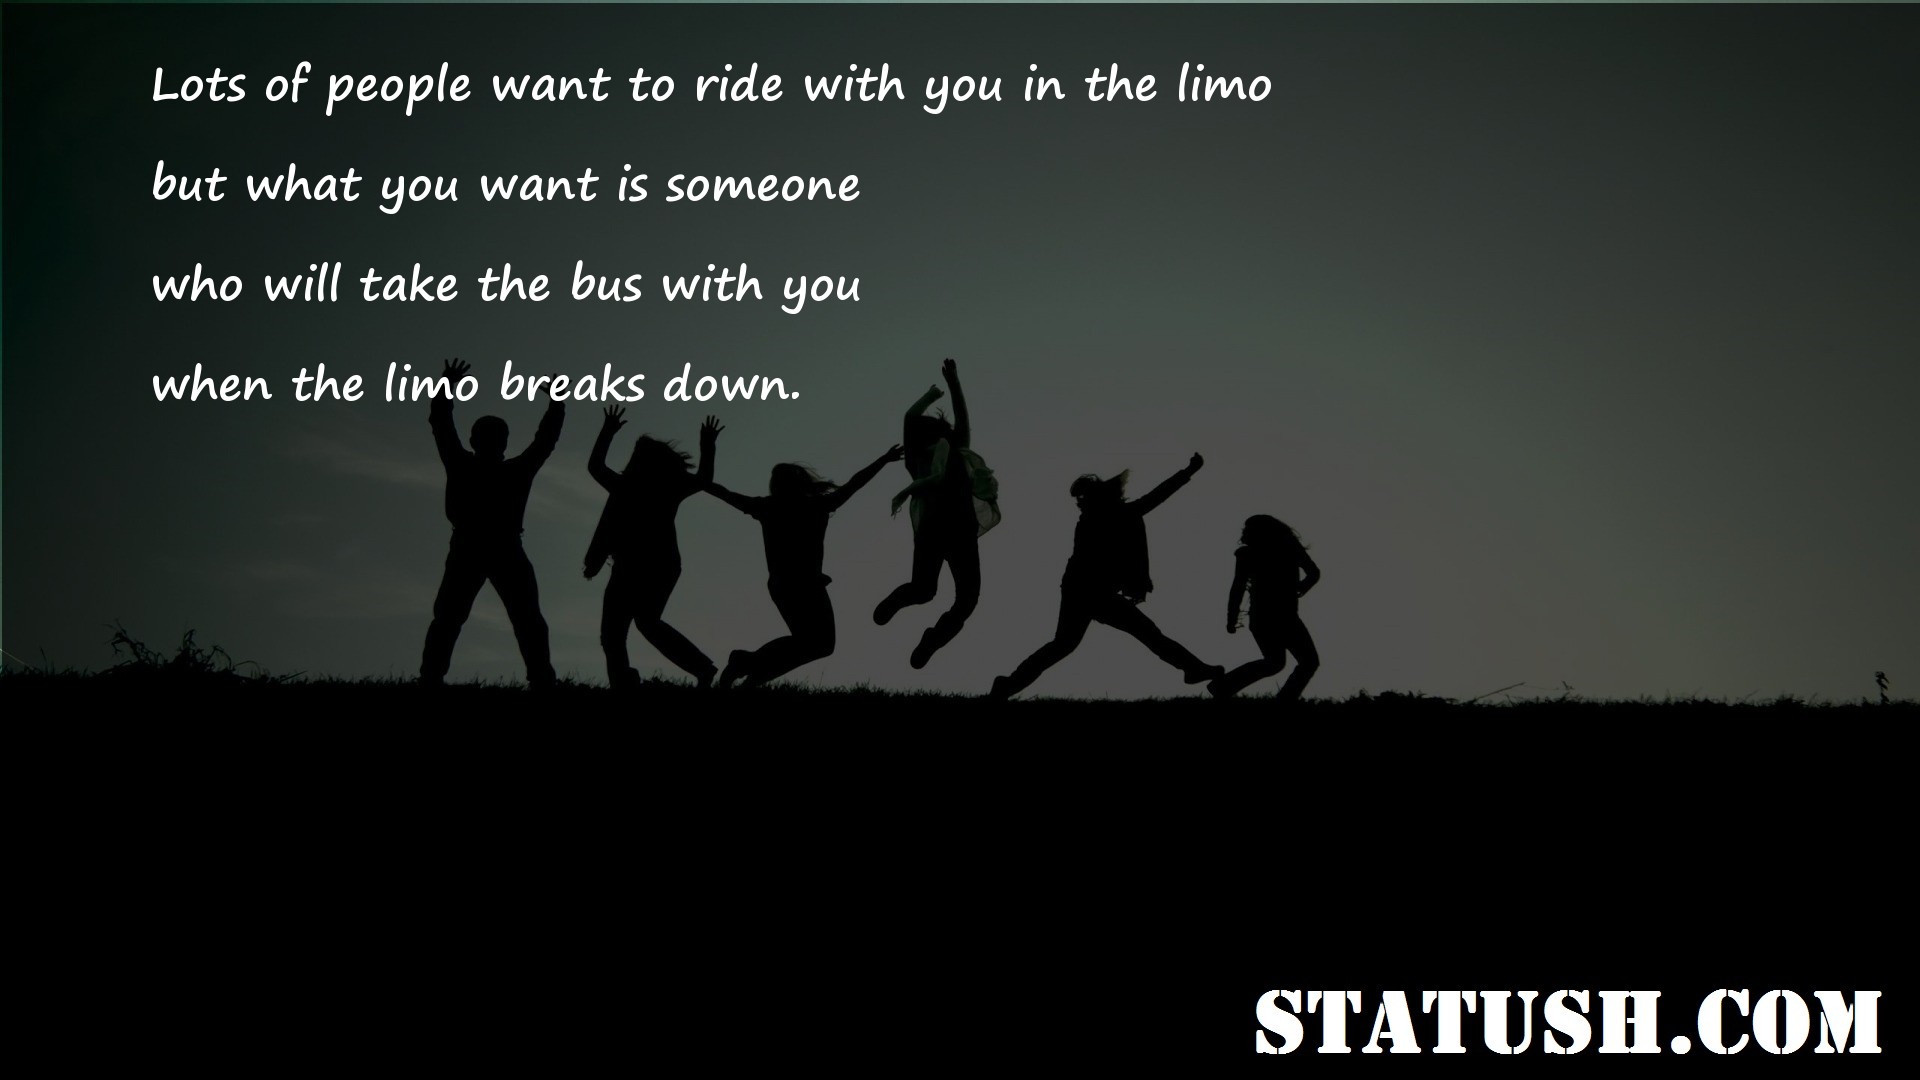 Lots of people want to ride with you in the limo - Friendship Quotes at statush.com